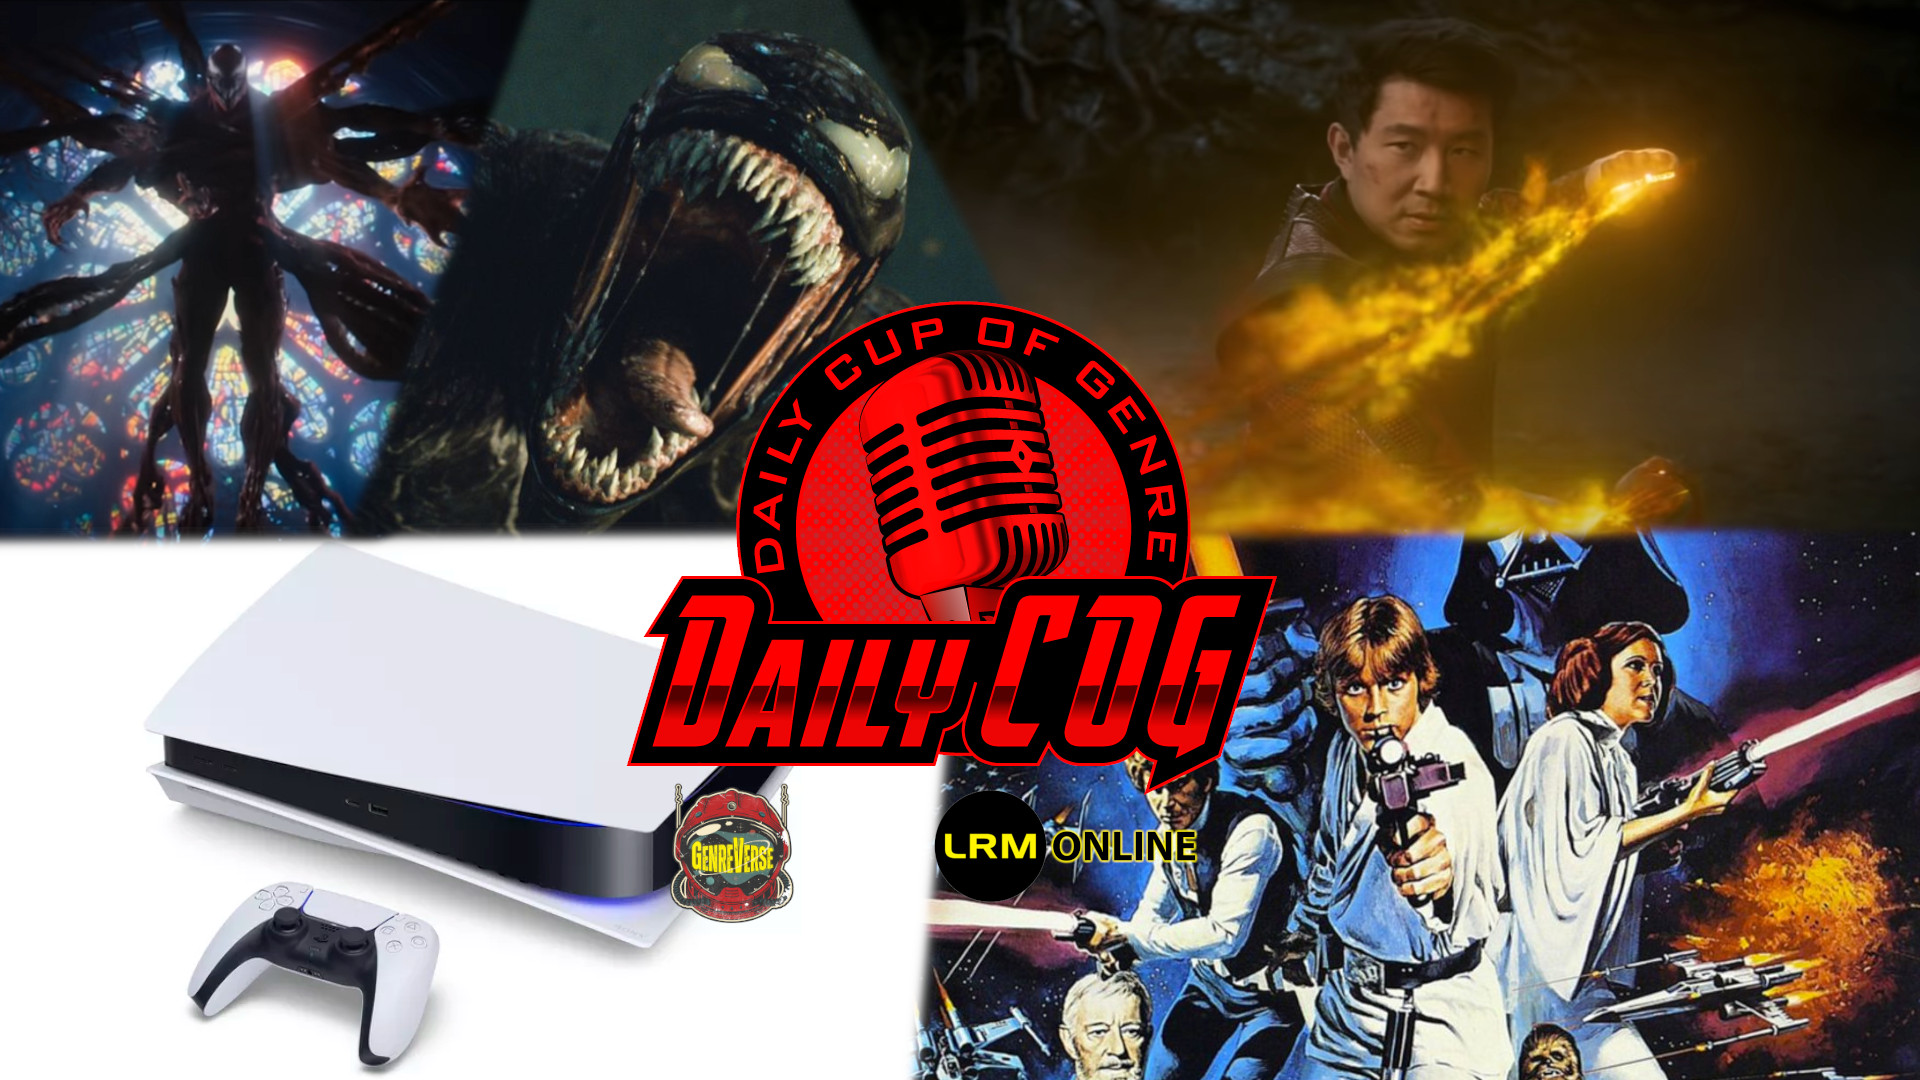 Venom: Let There Be Carnage Release Date Moved Up, Shang-Chi Has Box Office Numbers, A New Star Wars Trilogy Rumor, & PS5 Upgrades On Tech Tuesday | Daily COG